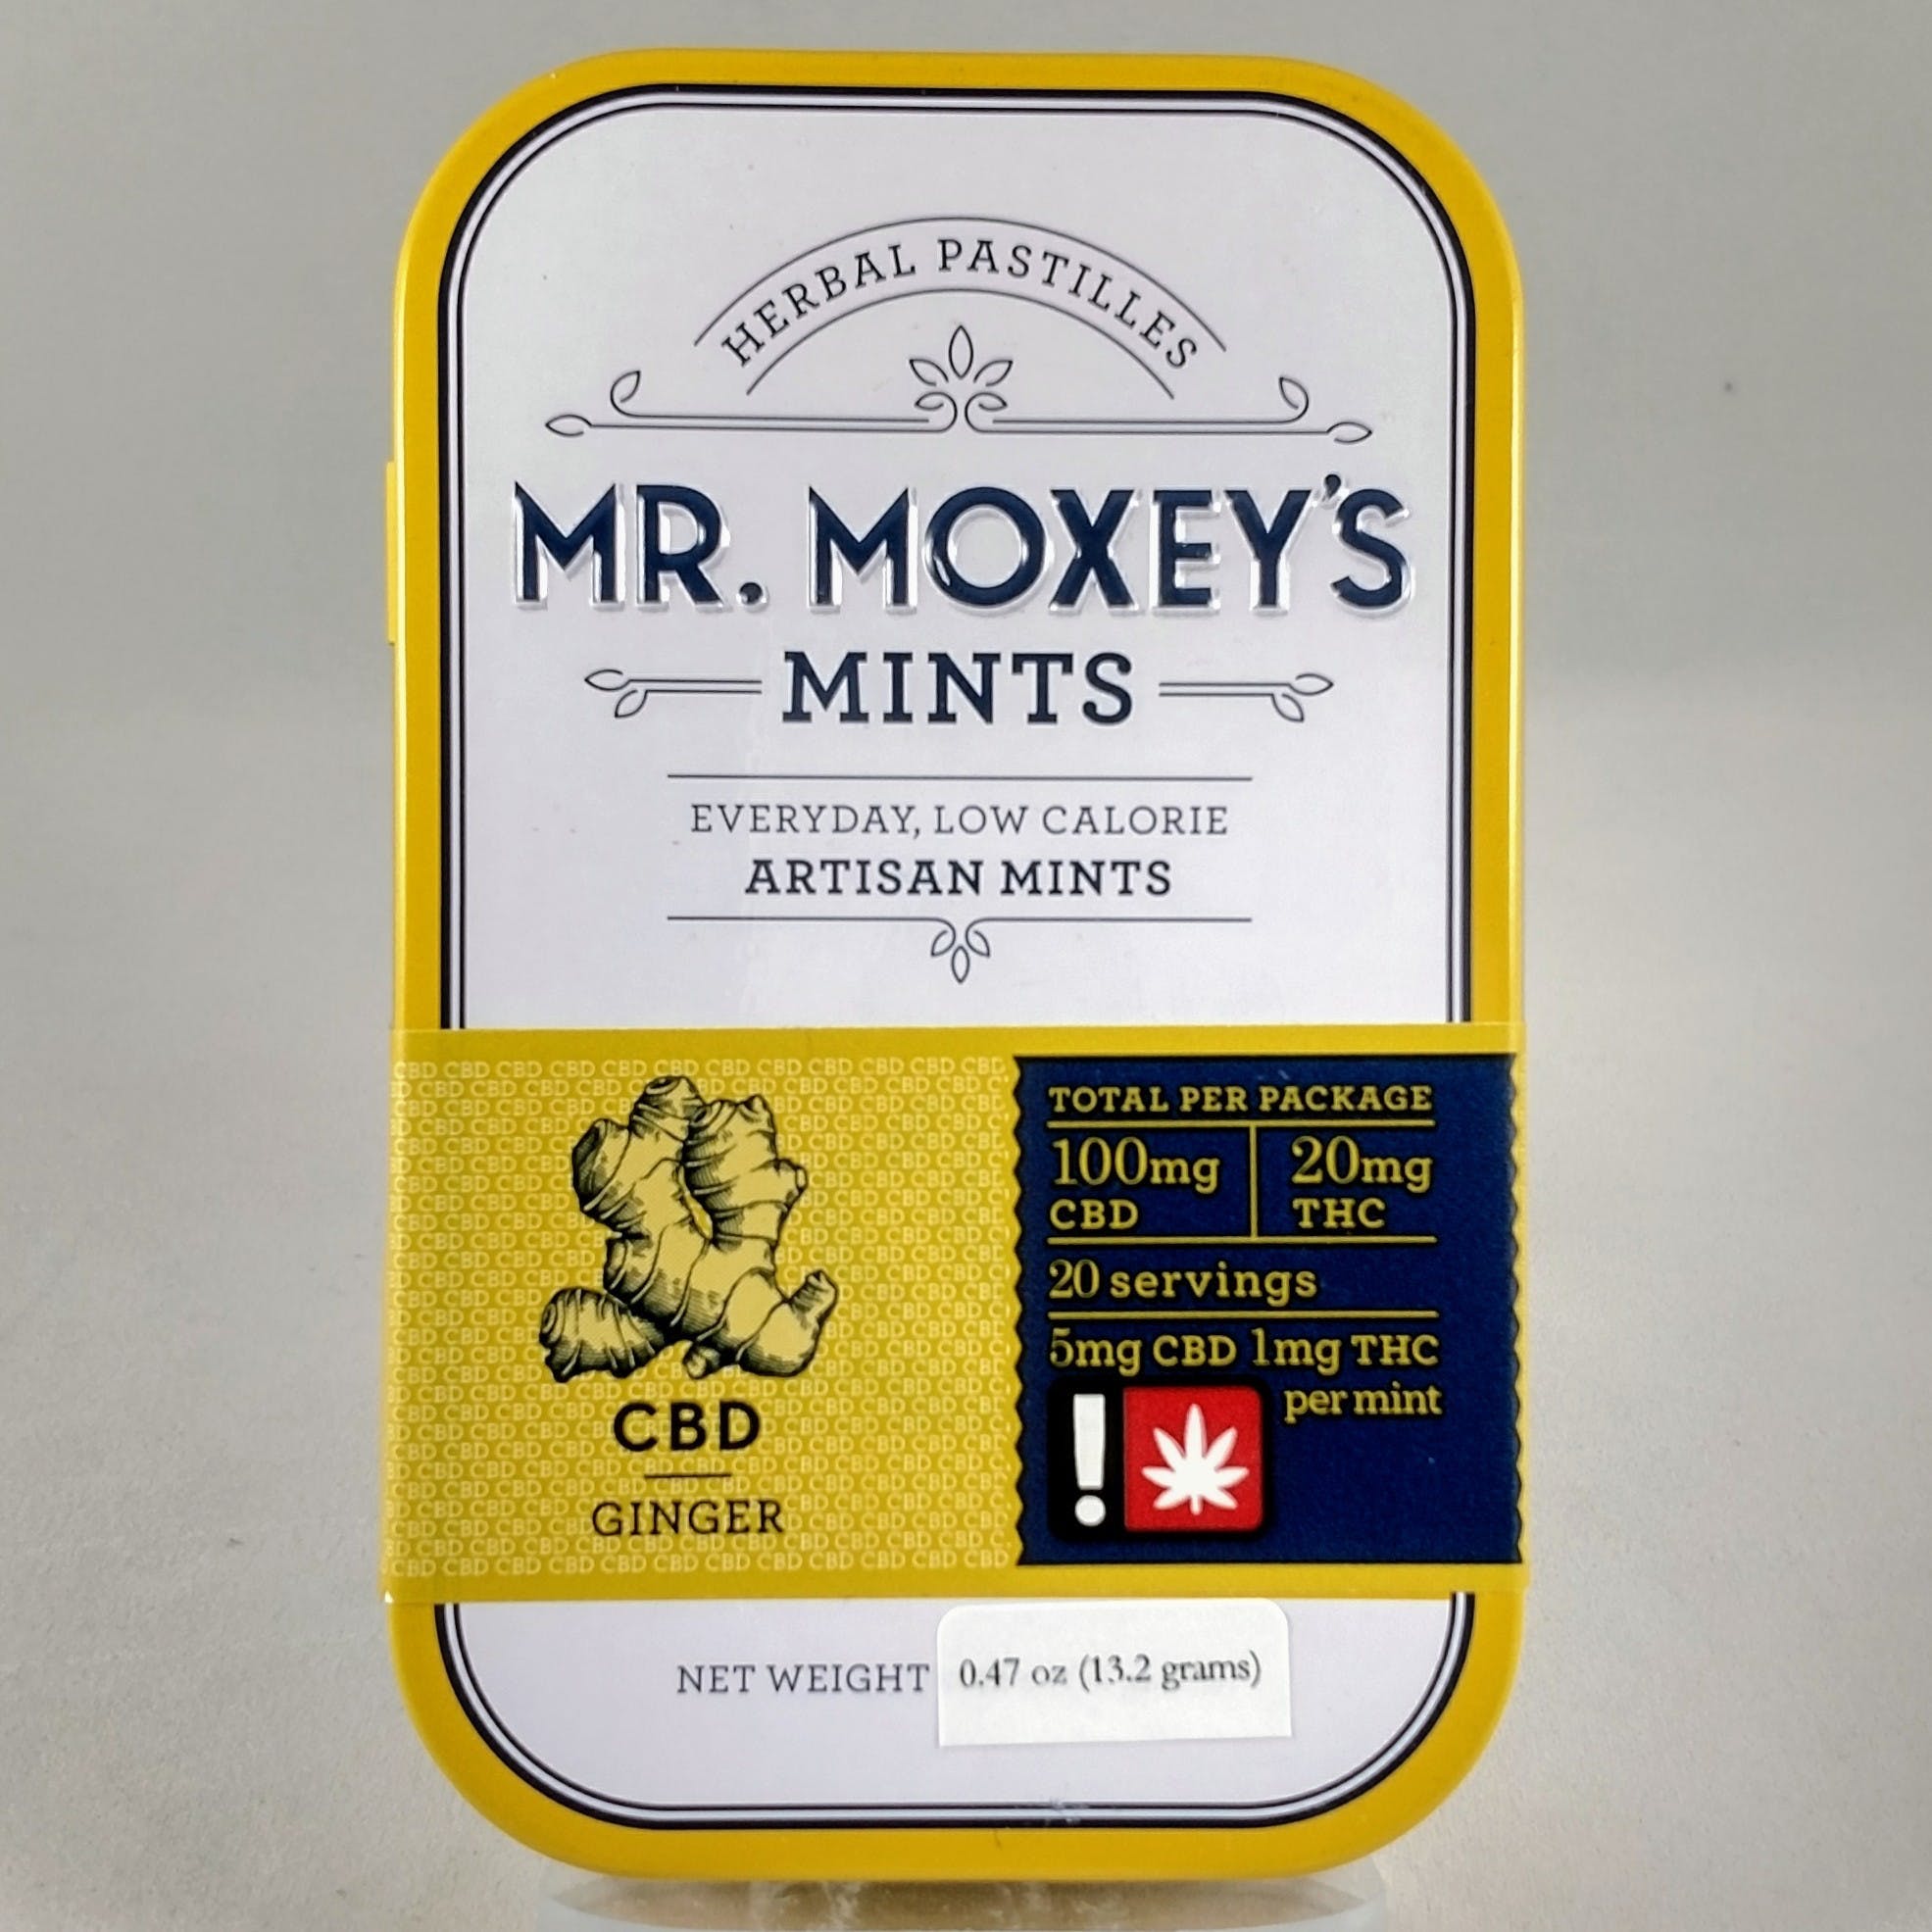 CBD Ginger by Mr. Moxey's Mints